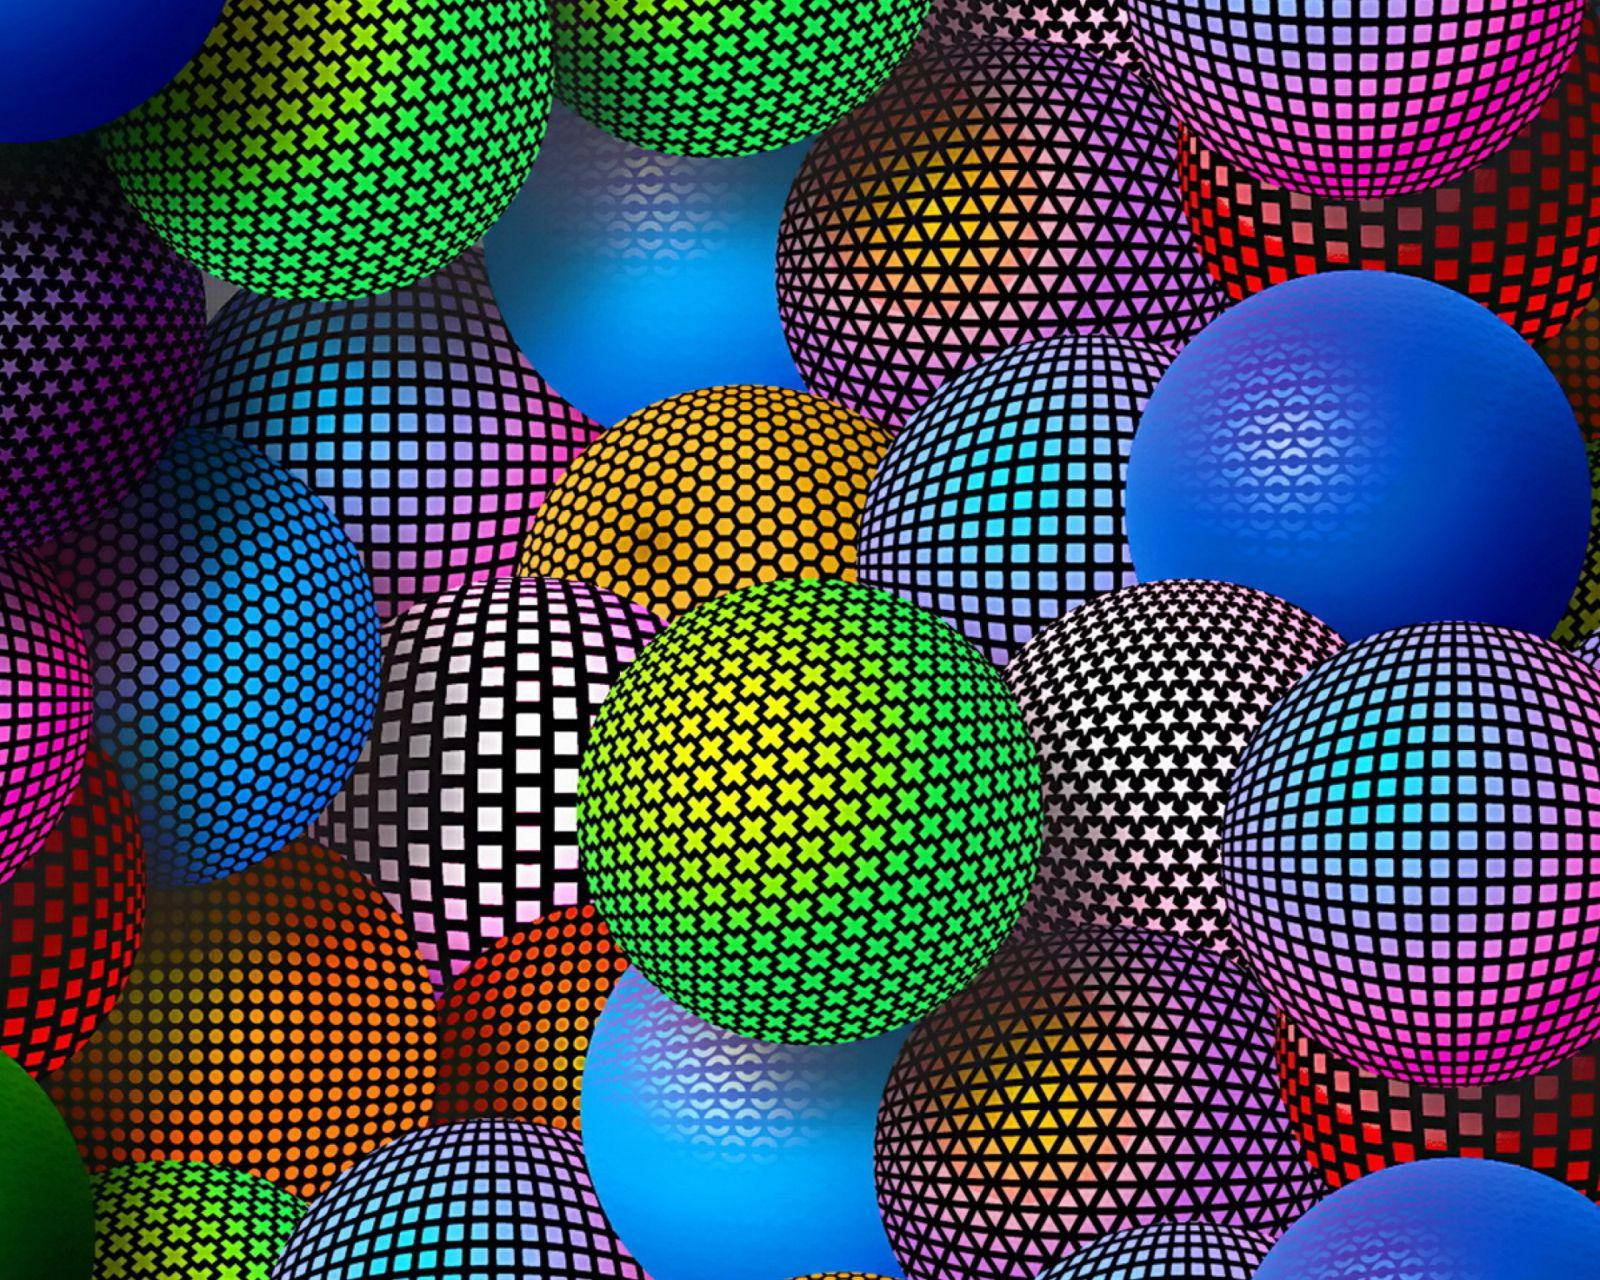 Colourful Spheres Samsung Galaxy Tablet Background